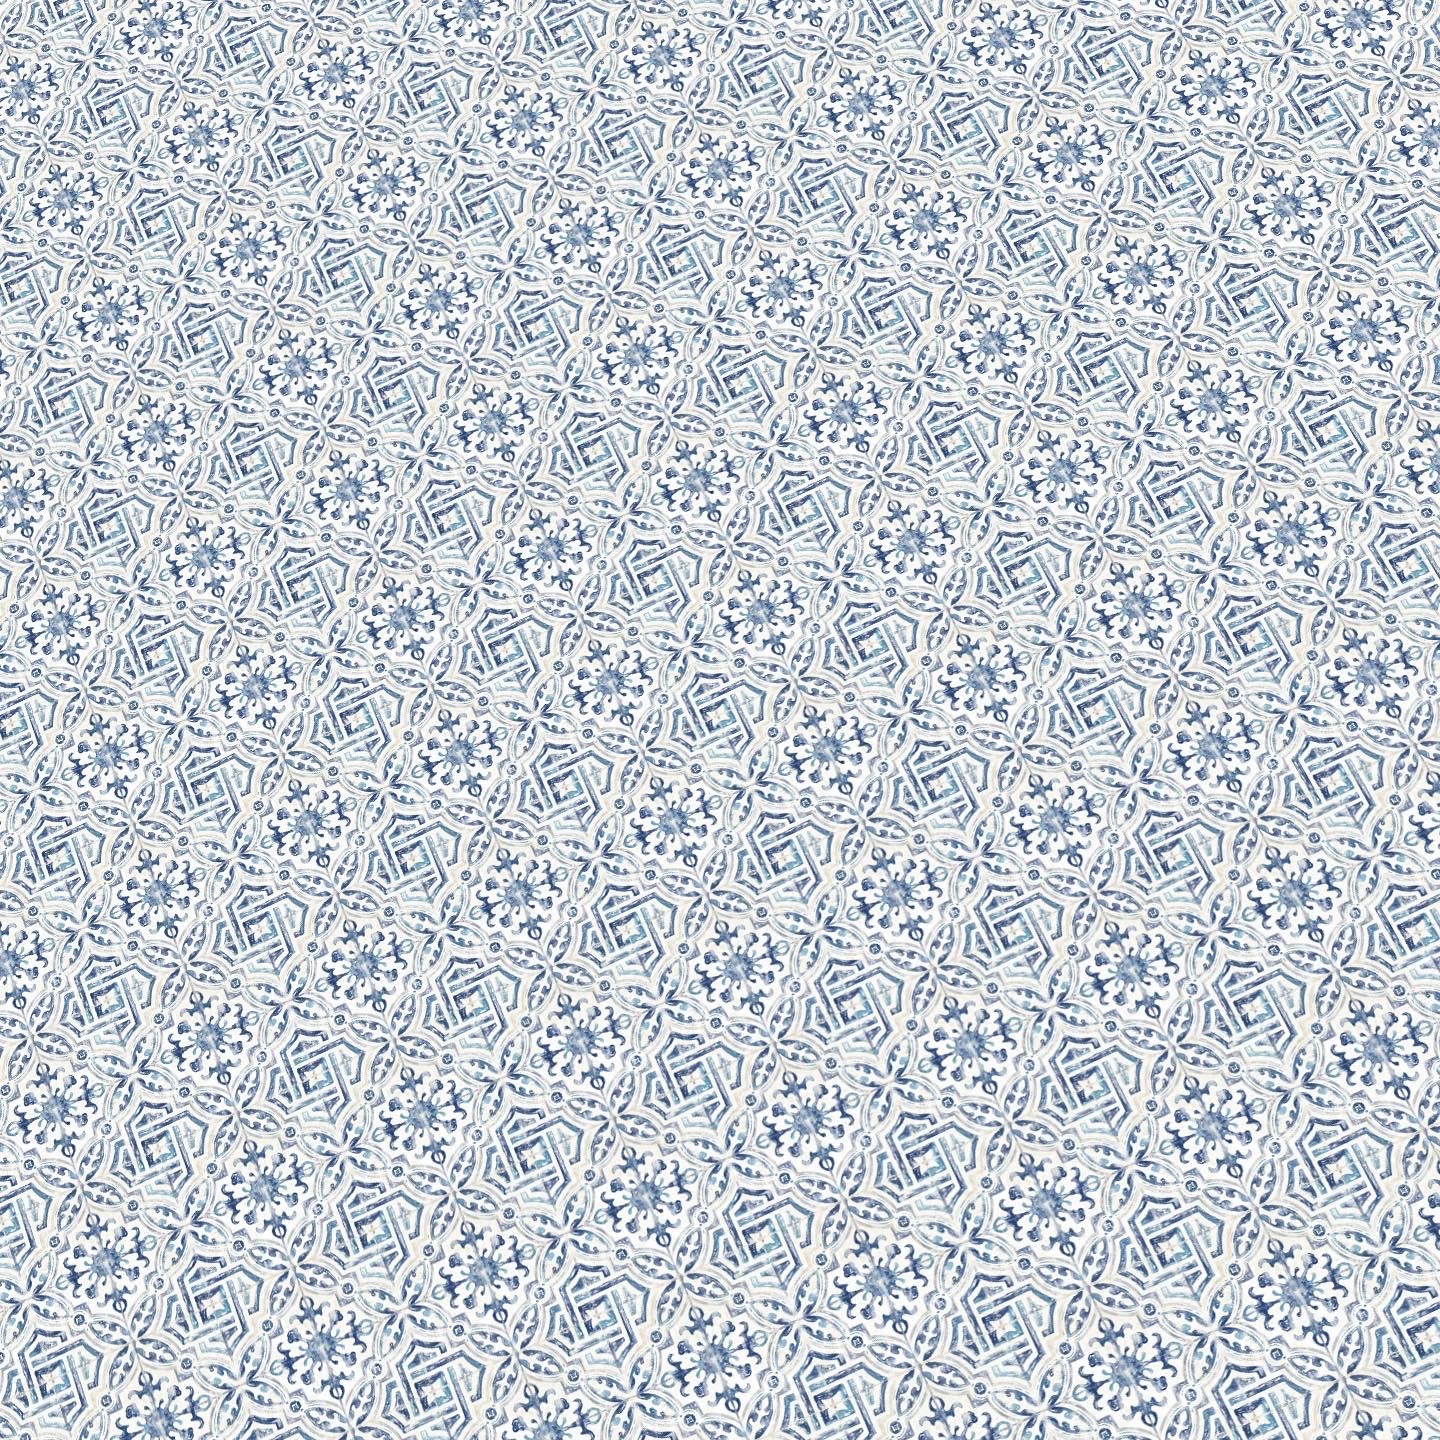 Modern Blue and White Paper Tile